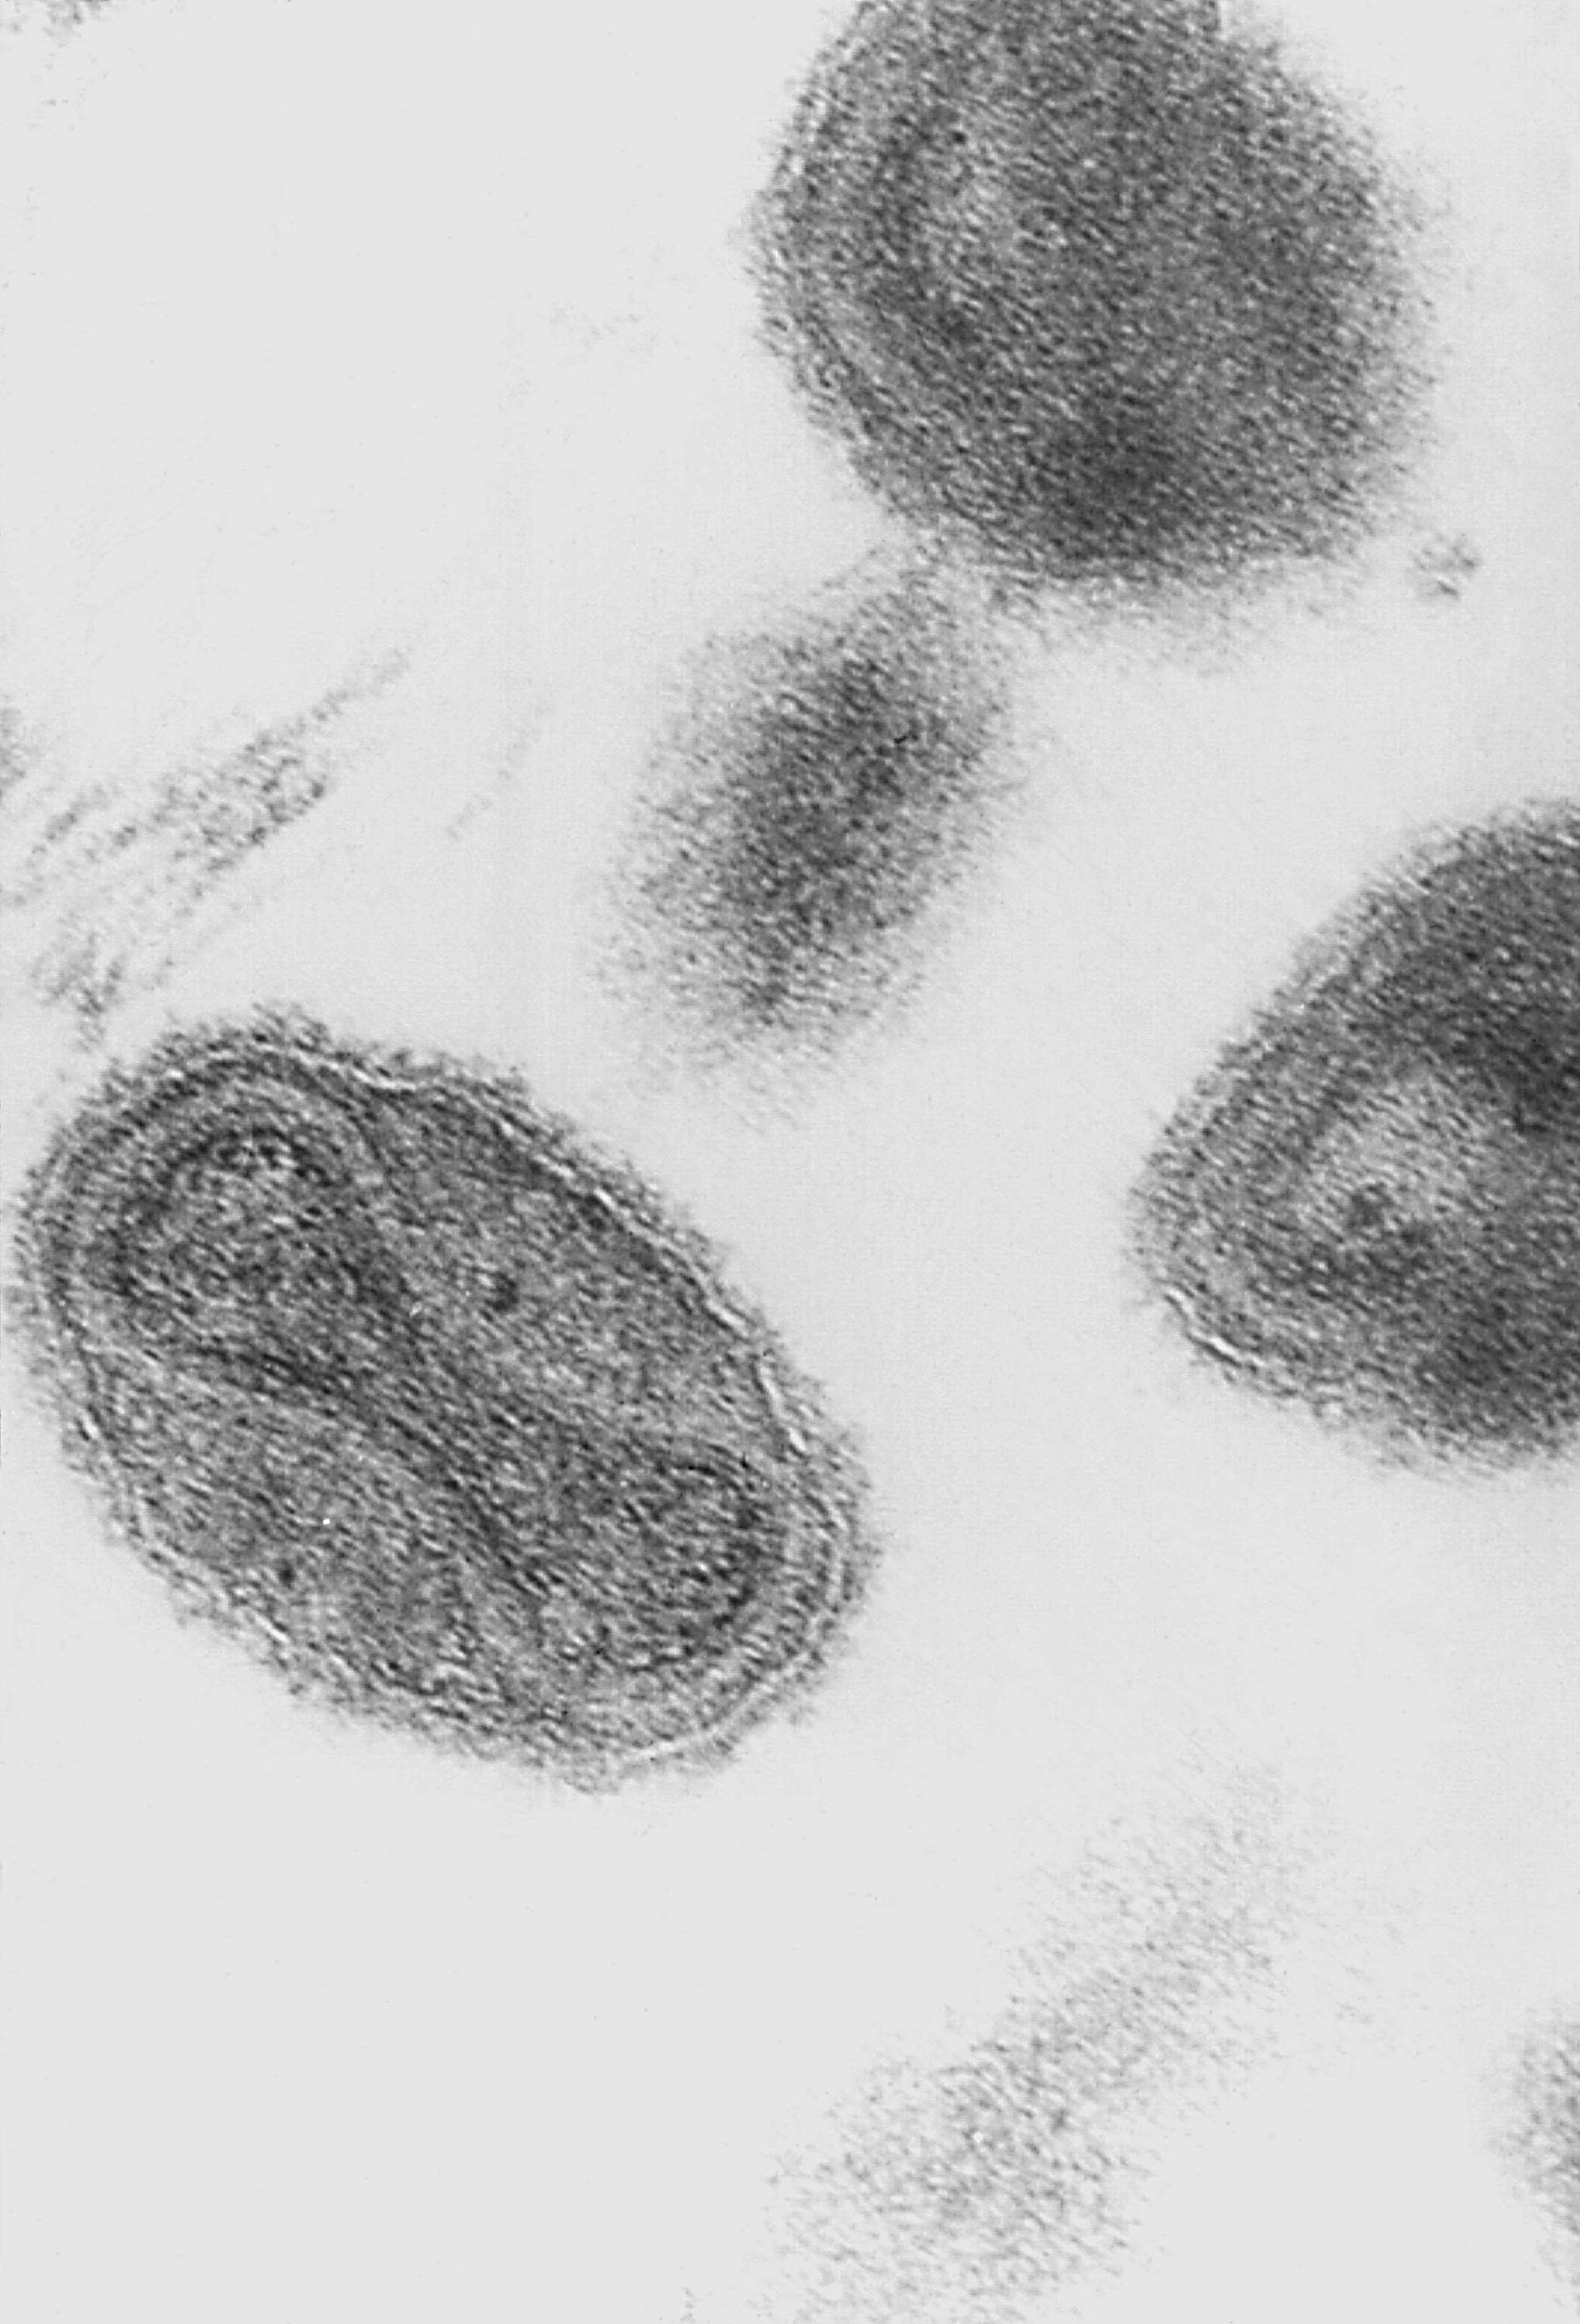 An electron micrograph of the smallpox virus in 1975 (Getty Images)